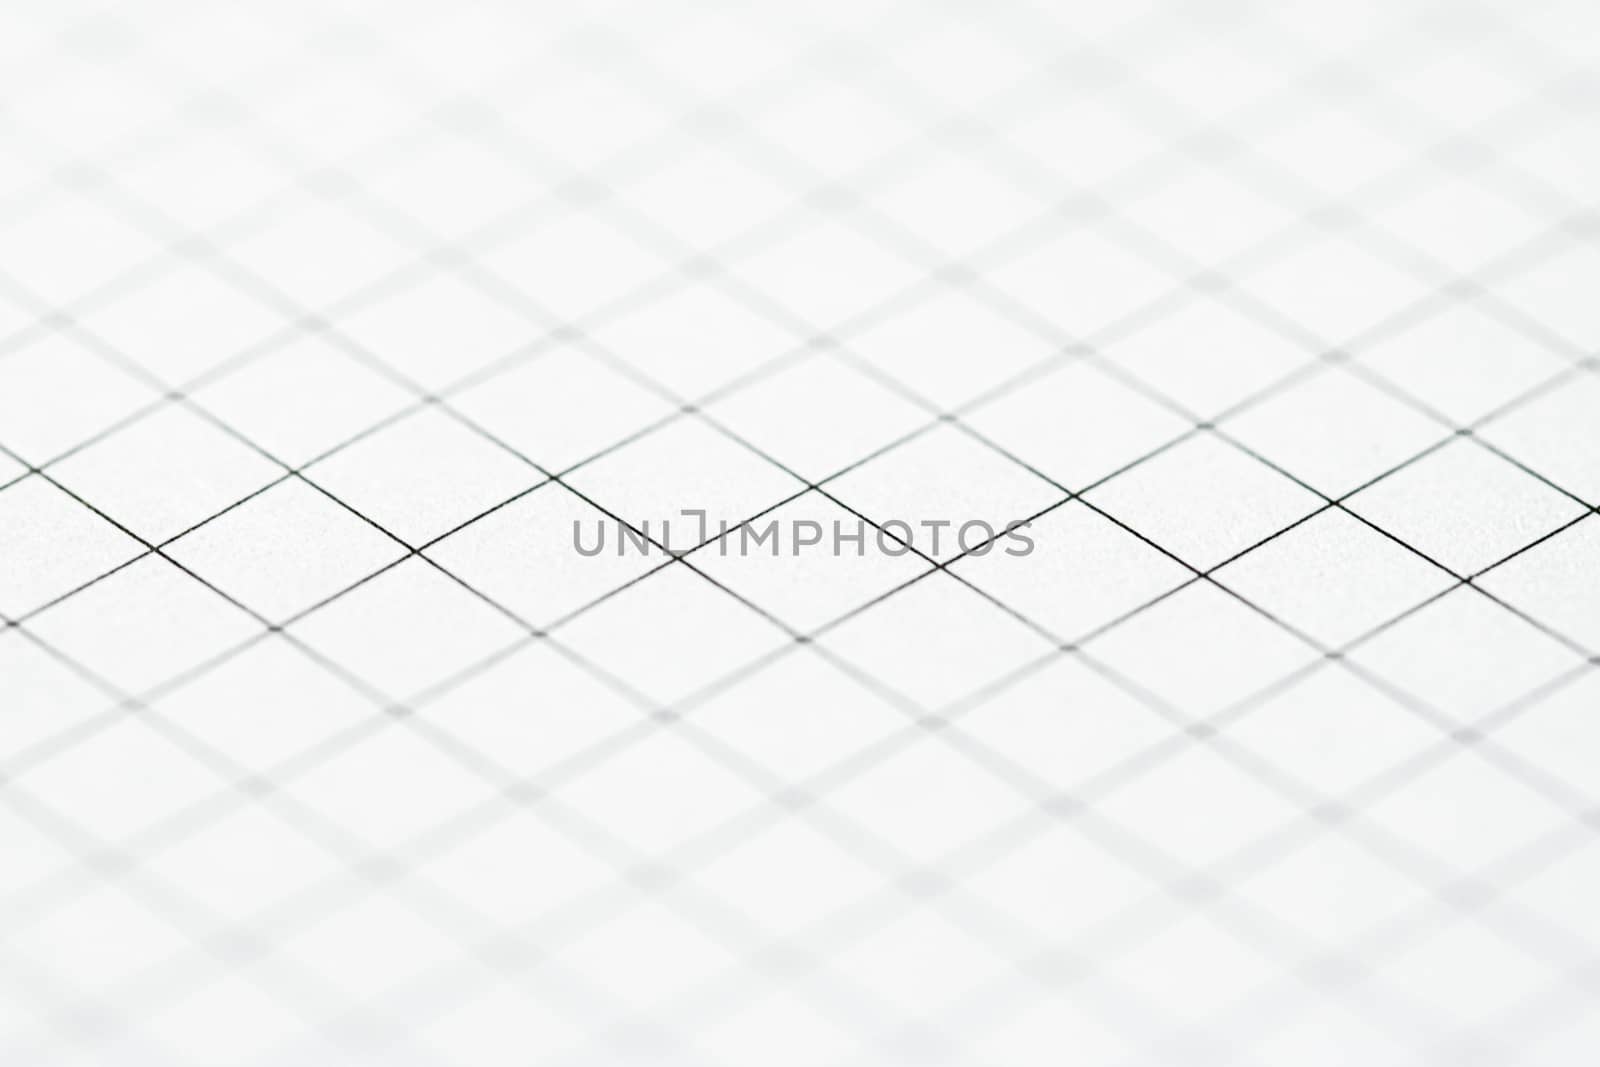 White grid paper texture, back to school backgrounds